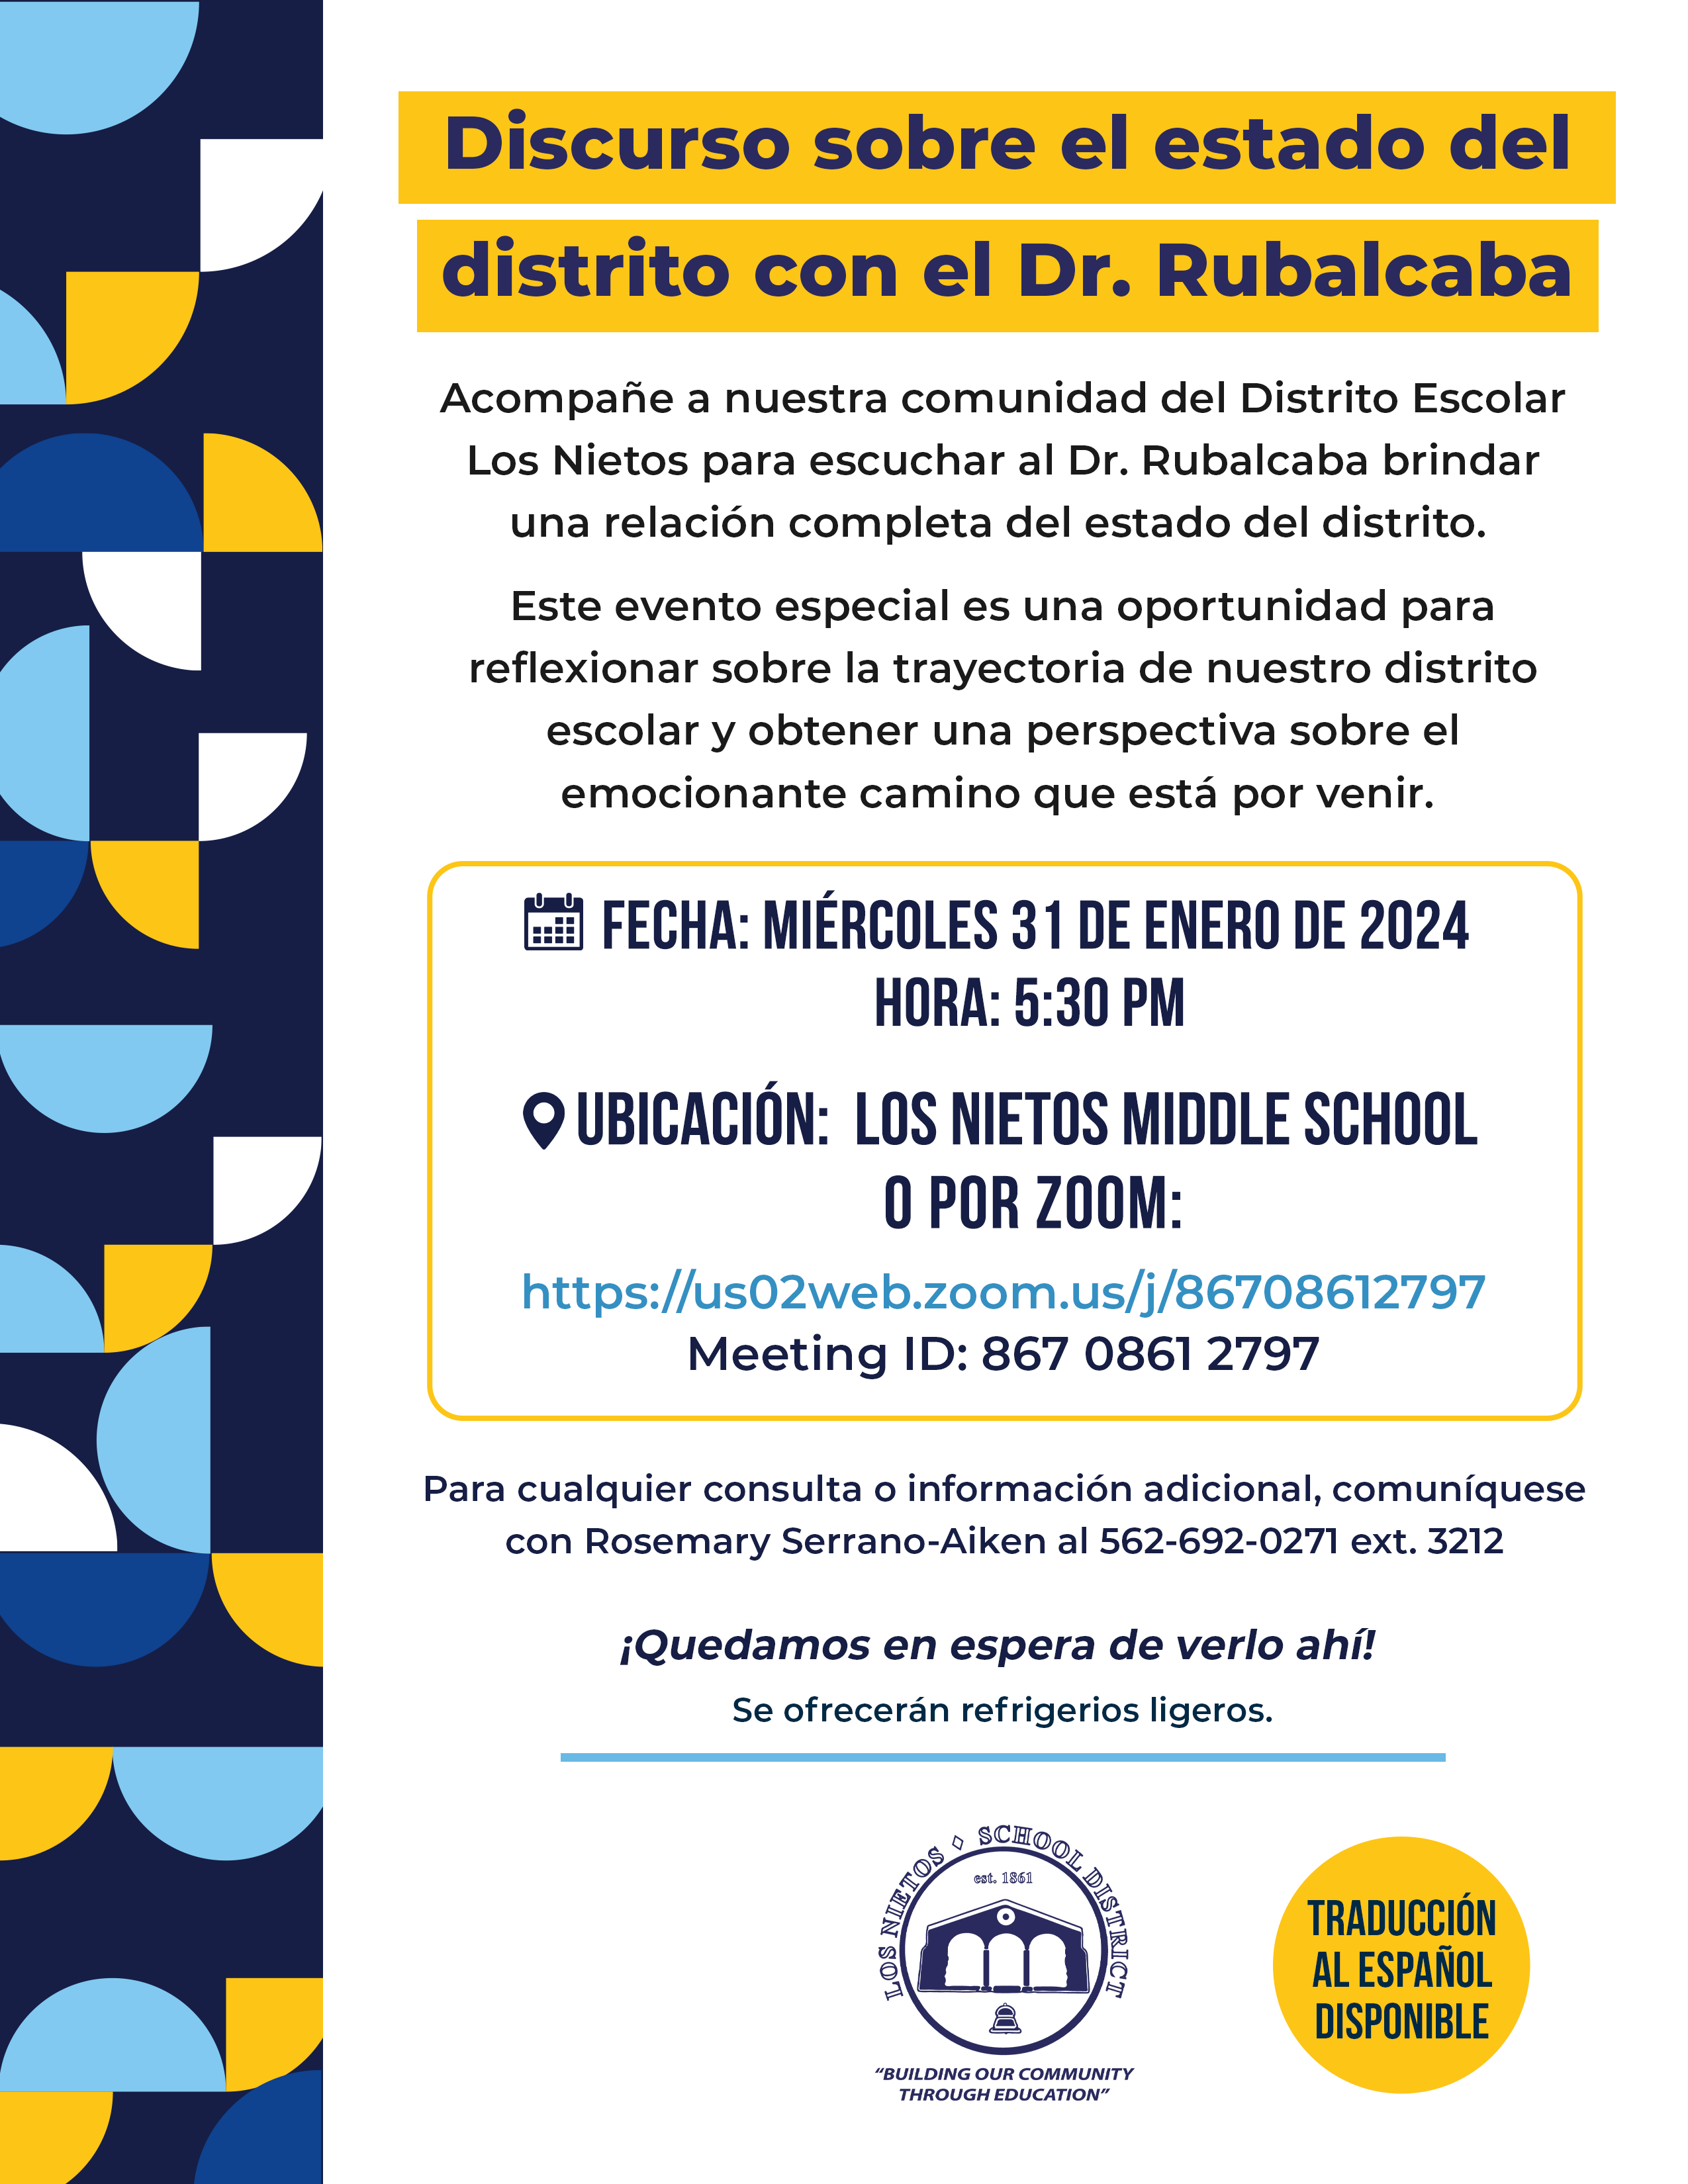 Spanish language flyer for the State-of-the-District Address with Dr. Rubalcaba. The flyer features a modern, geometric design with blue and yellow accents. It invites the community of Los Nietos School District to join a comprehensive State-of-the-District Address by Dr. Rubalcaba. The event is described as a reflection on the journey of the school district and an insight into the future. The details include the date, Wednesday, January 31, 2024, at 5:30 PM, at Los Nietos Middle School or via Zoom, with a provided meeting ID and link. There's a note for inquiries directing to contact Rosemary Serrano-Aiken with a phone number and an extension. The flyer states 'We look forward to seeing you there!' and mentions that light refreshments will be provided. At the bottom, there is an emblem of Los Nietos School District, and a note that translation to Spanish is available. The district's motto 'Building Our Community Through Education' is also included.